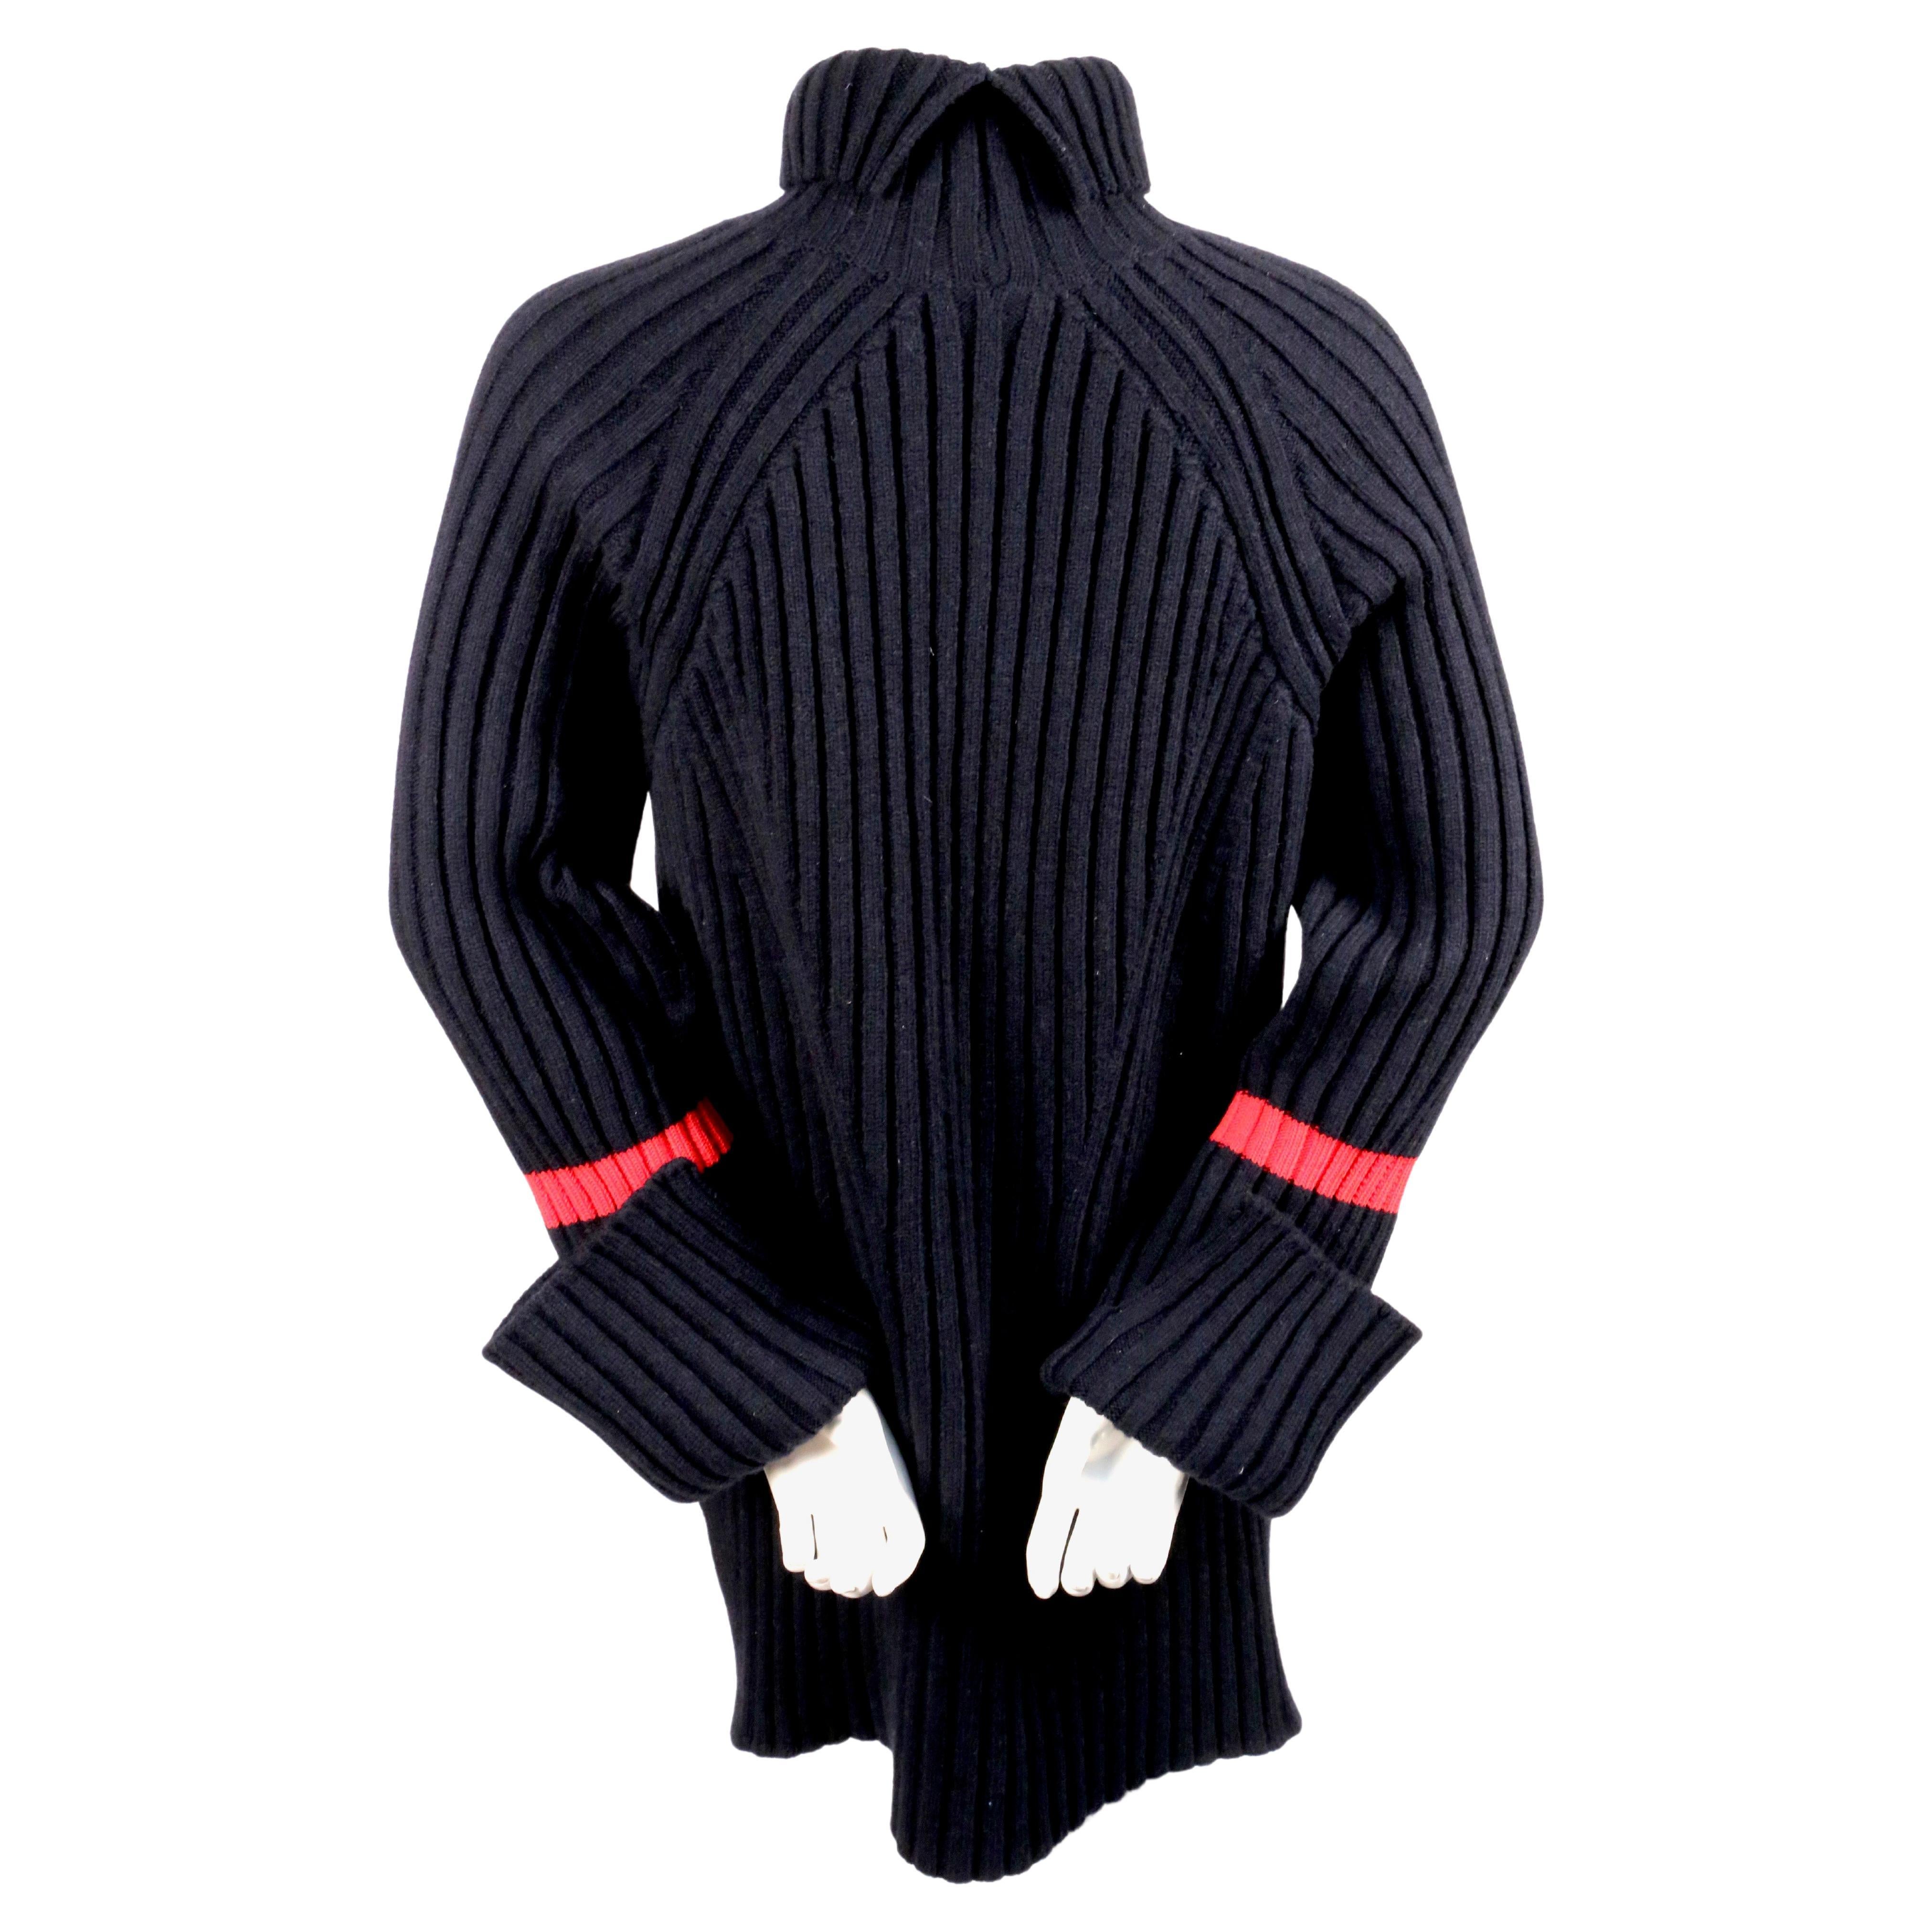 Women's or Men's CELINE by PHOEBE PHILO oversized navy sweater with red stripe